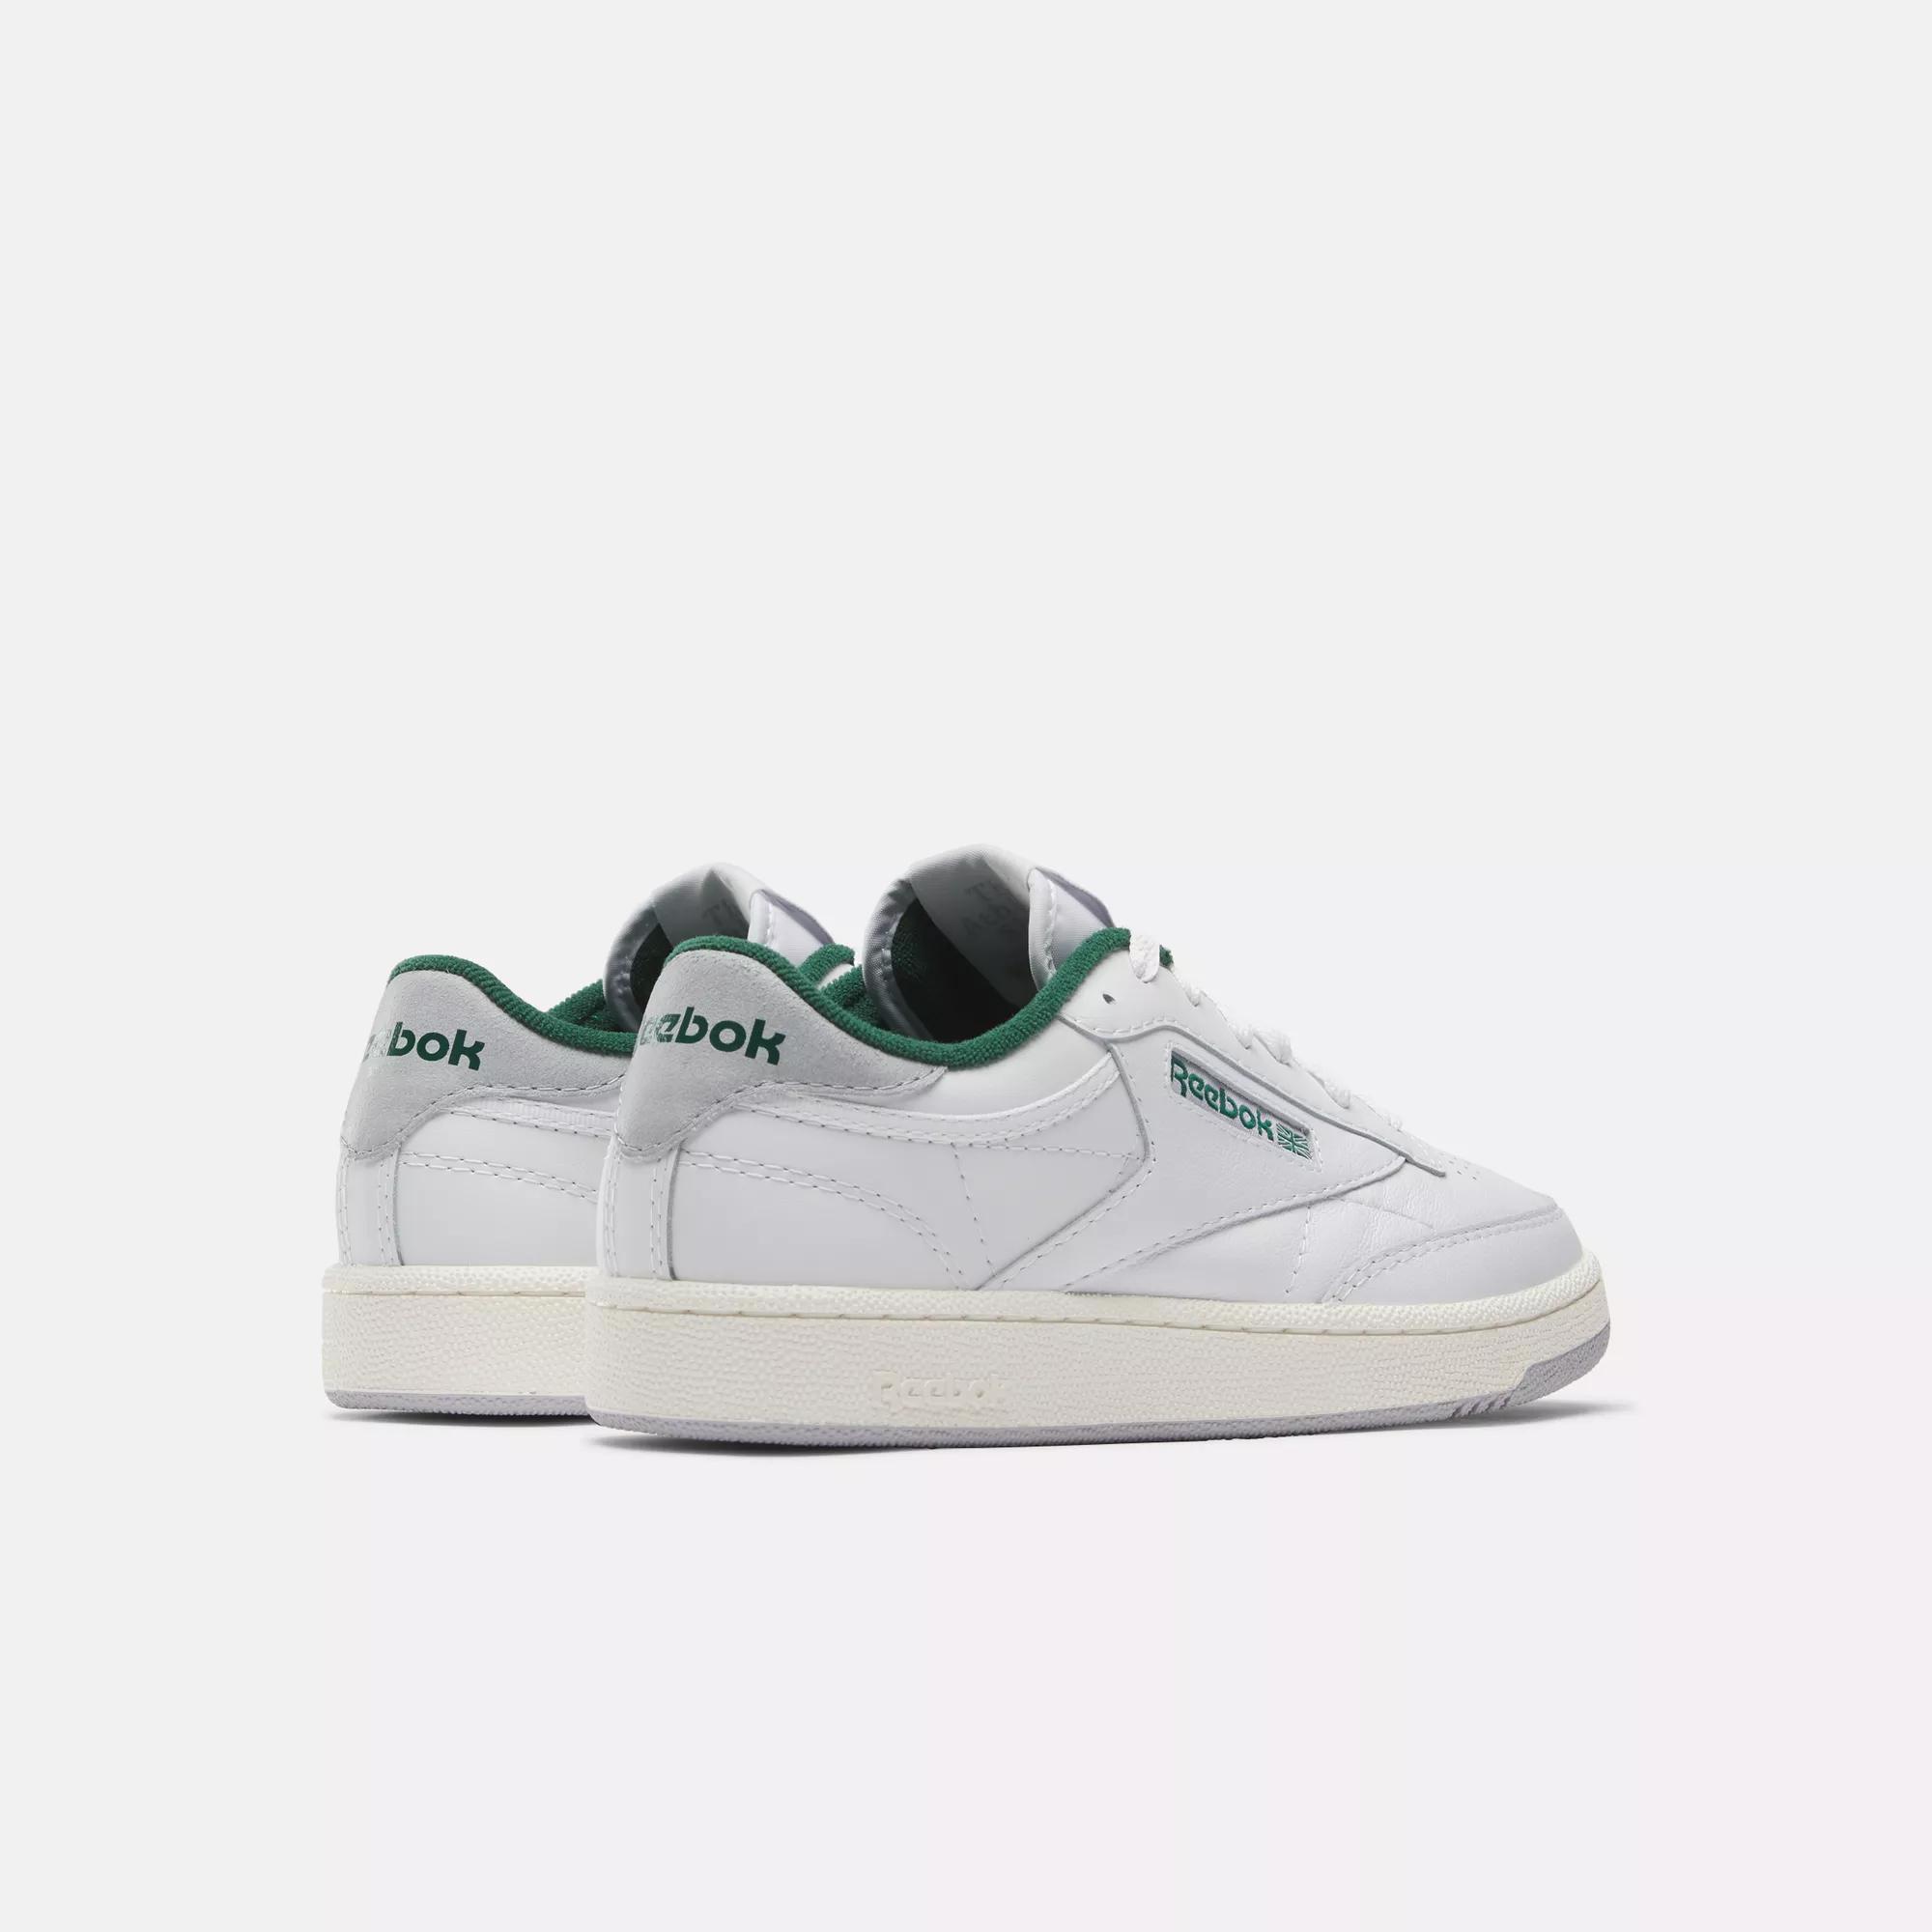 Reebok Club C 85 sneakers in white with green detail